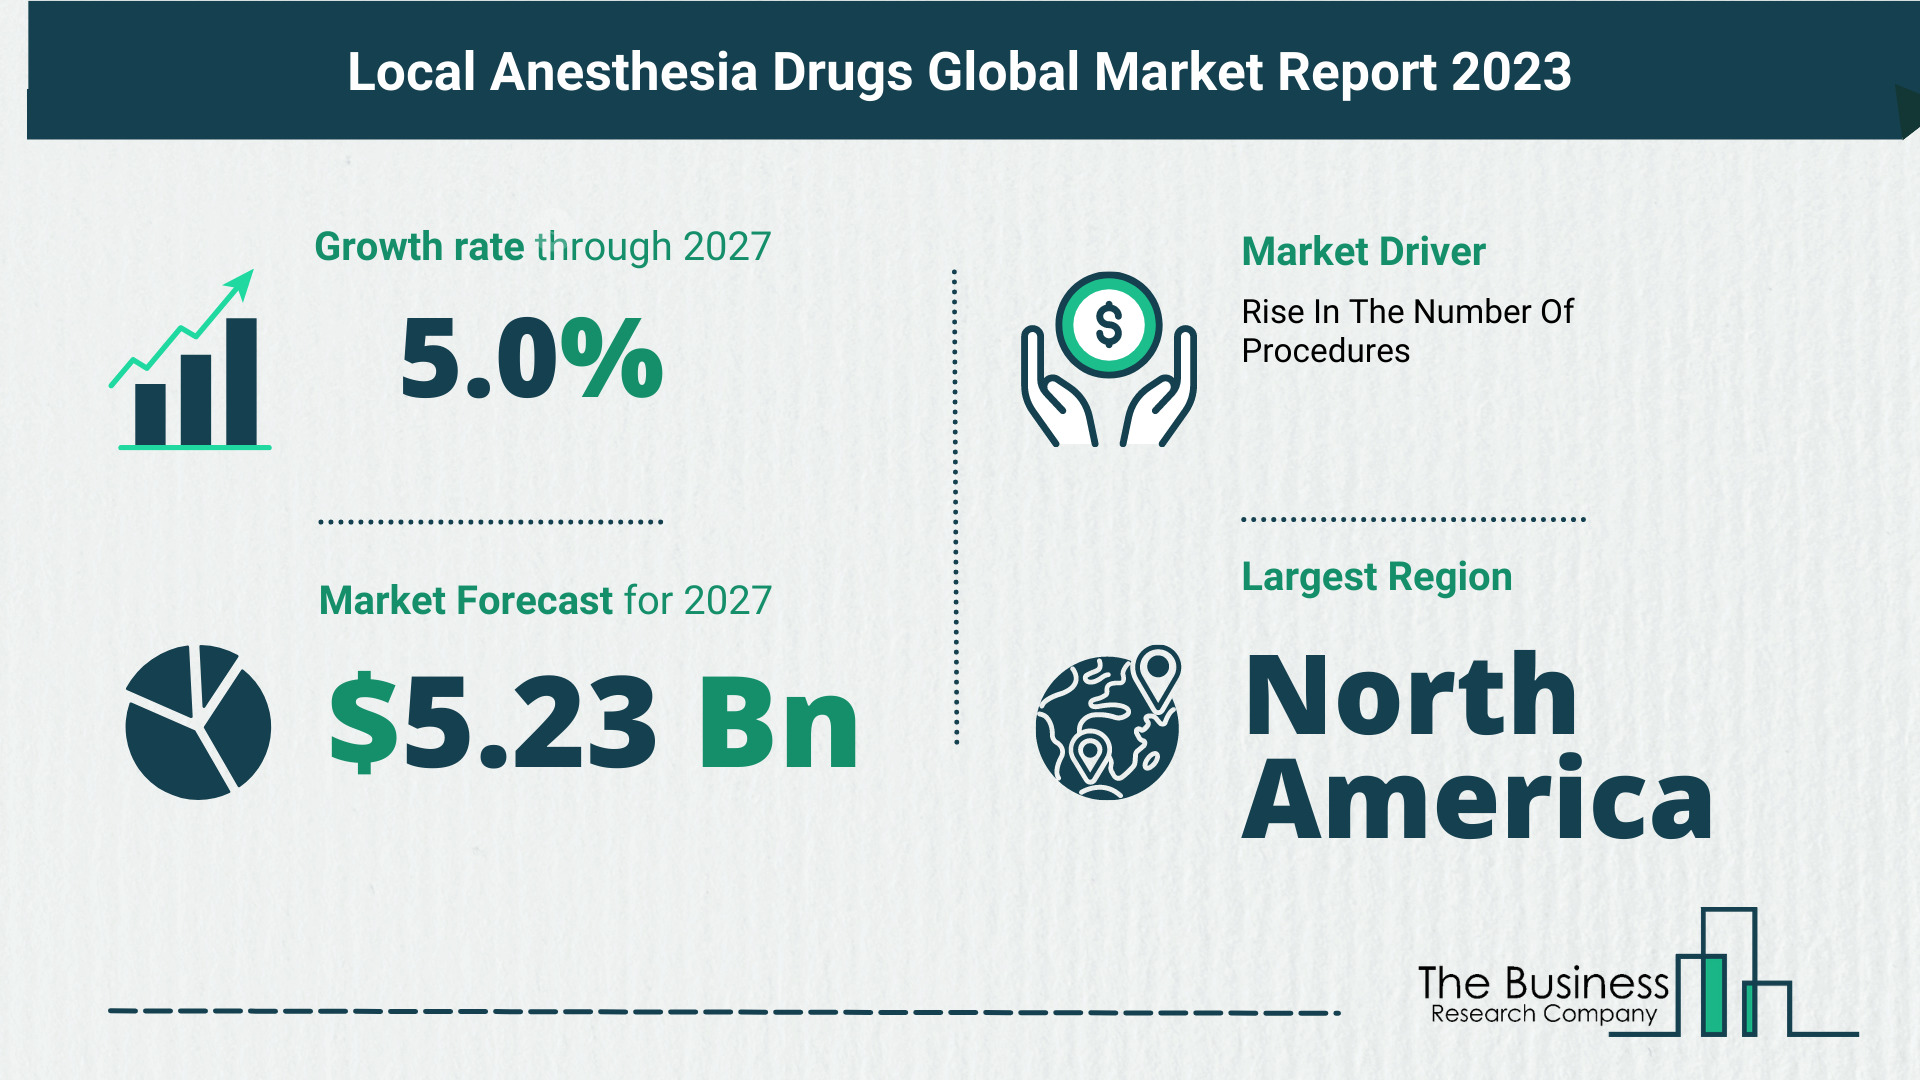 What Is The Forecast Growth Rate For The Local Anesthesia Drugs Market?